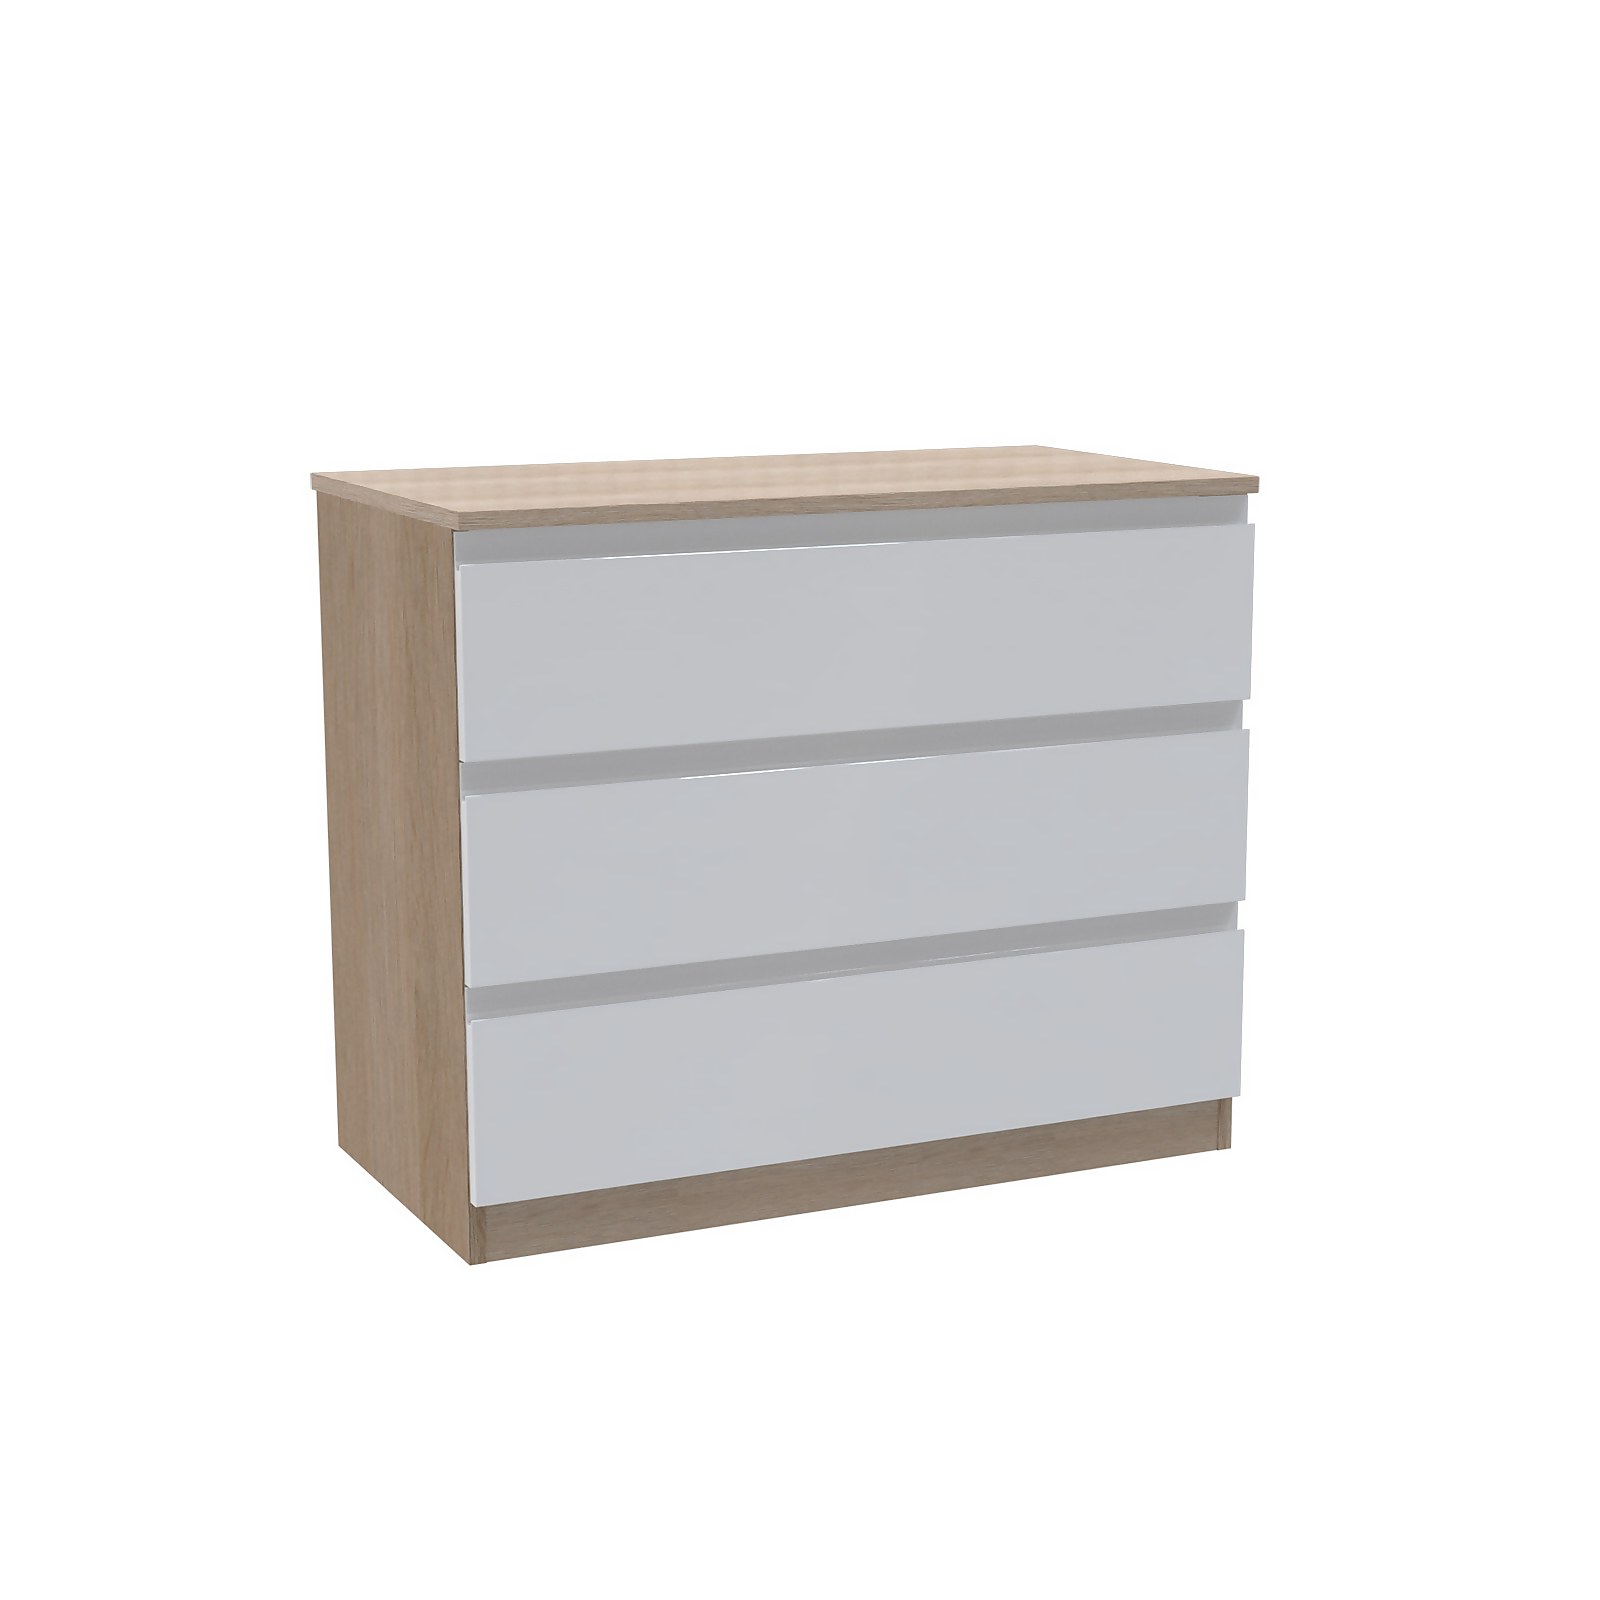 House Beautiful Escape Wide Chest of Drawers - Oak Effect Carcass, Gloss White Handleless Drawer Fronts (W) 900mm x (H) 756mm